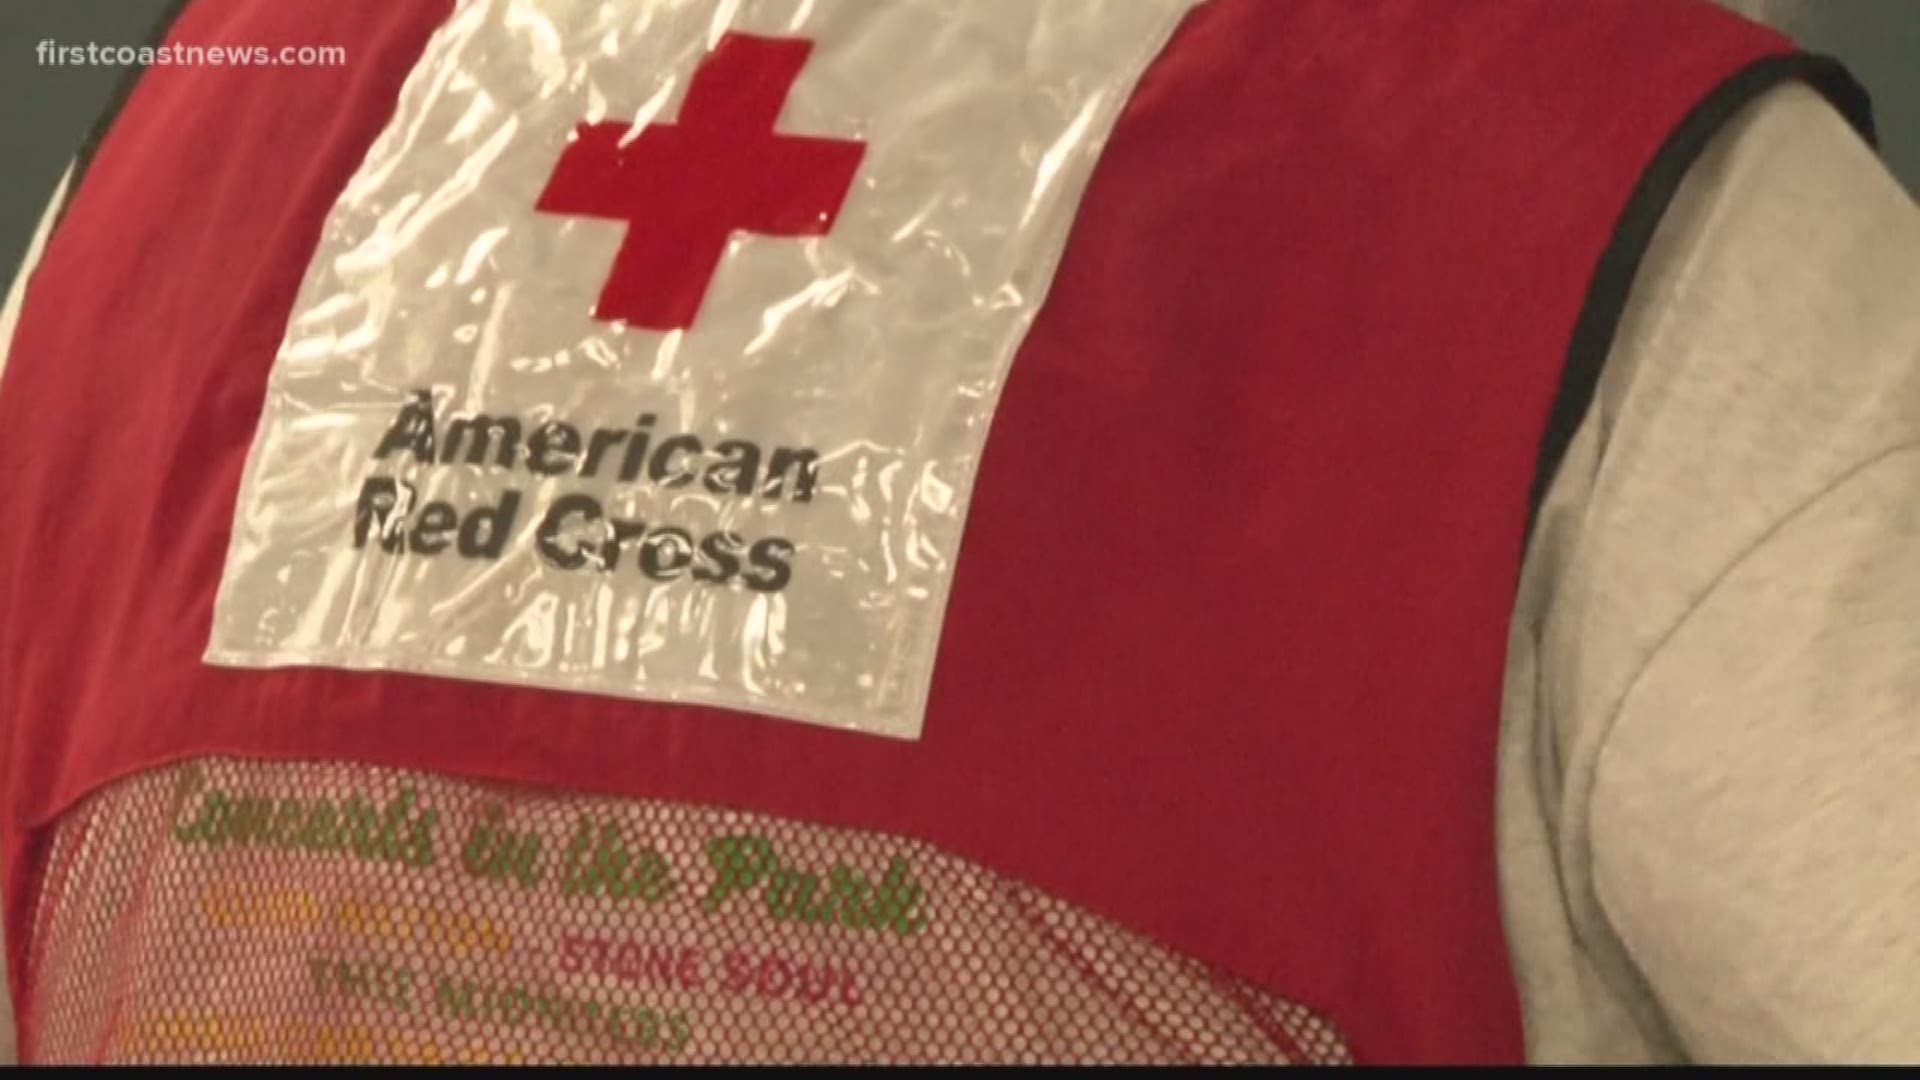 Seven shelters supported by the American Red Cross will be assisting First Coast residents these next few days.